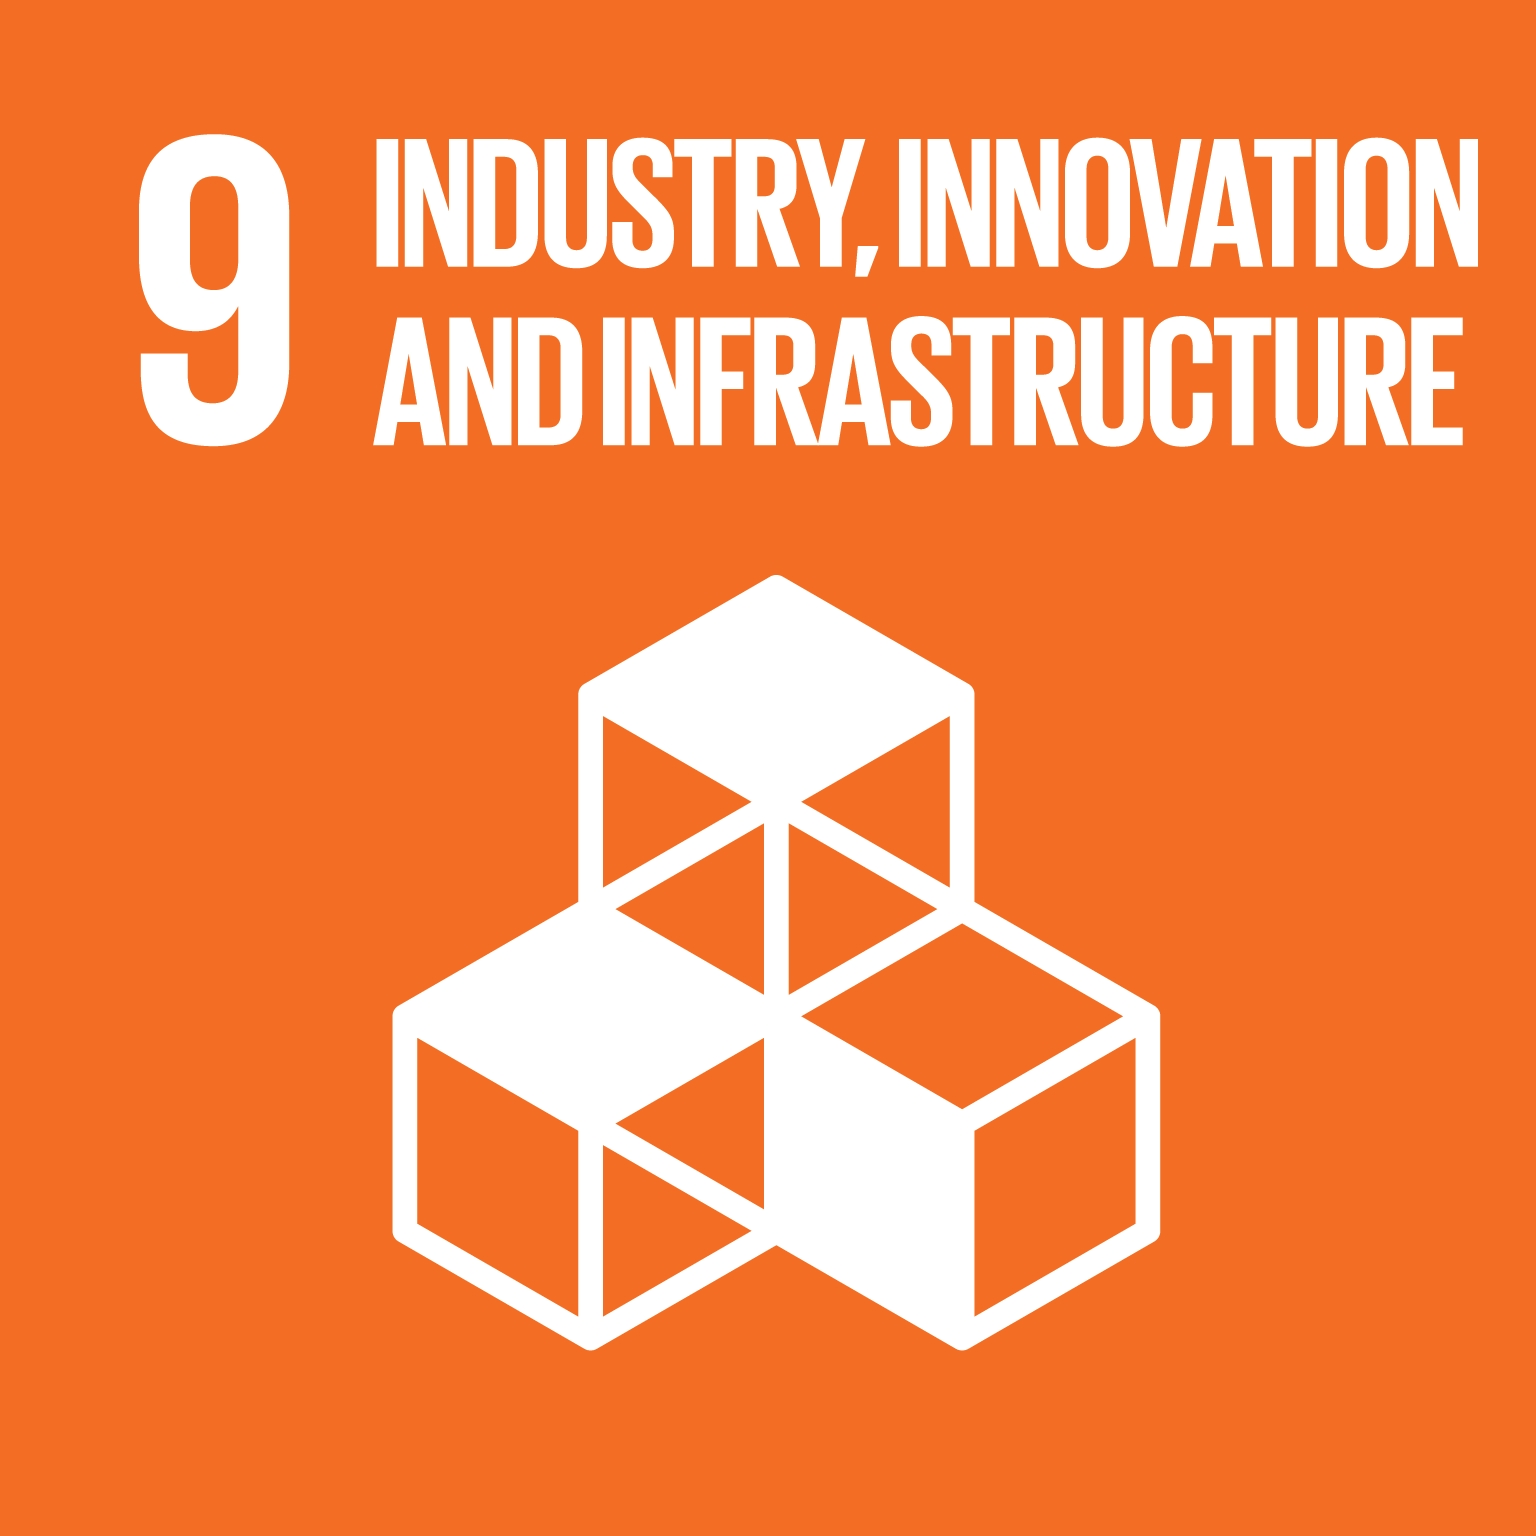 9 INDUESTRY, INNOVATION AND INFRASTRUCTURE 